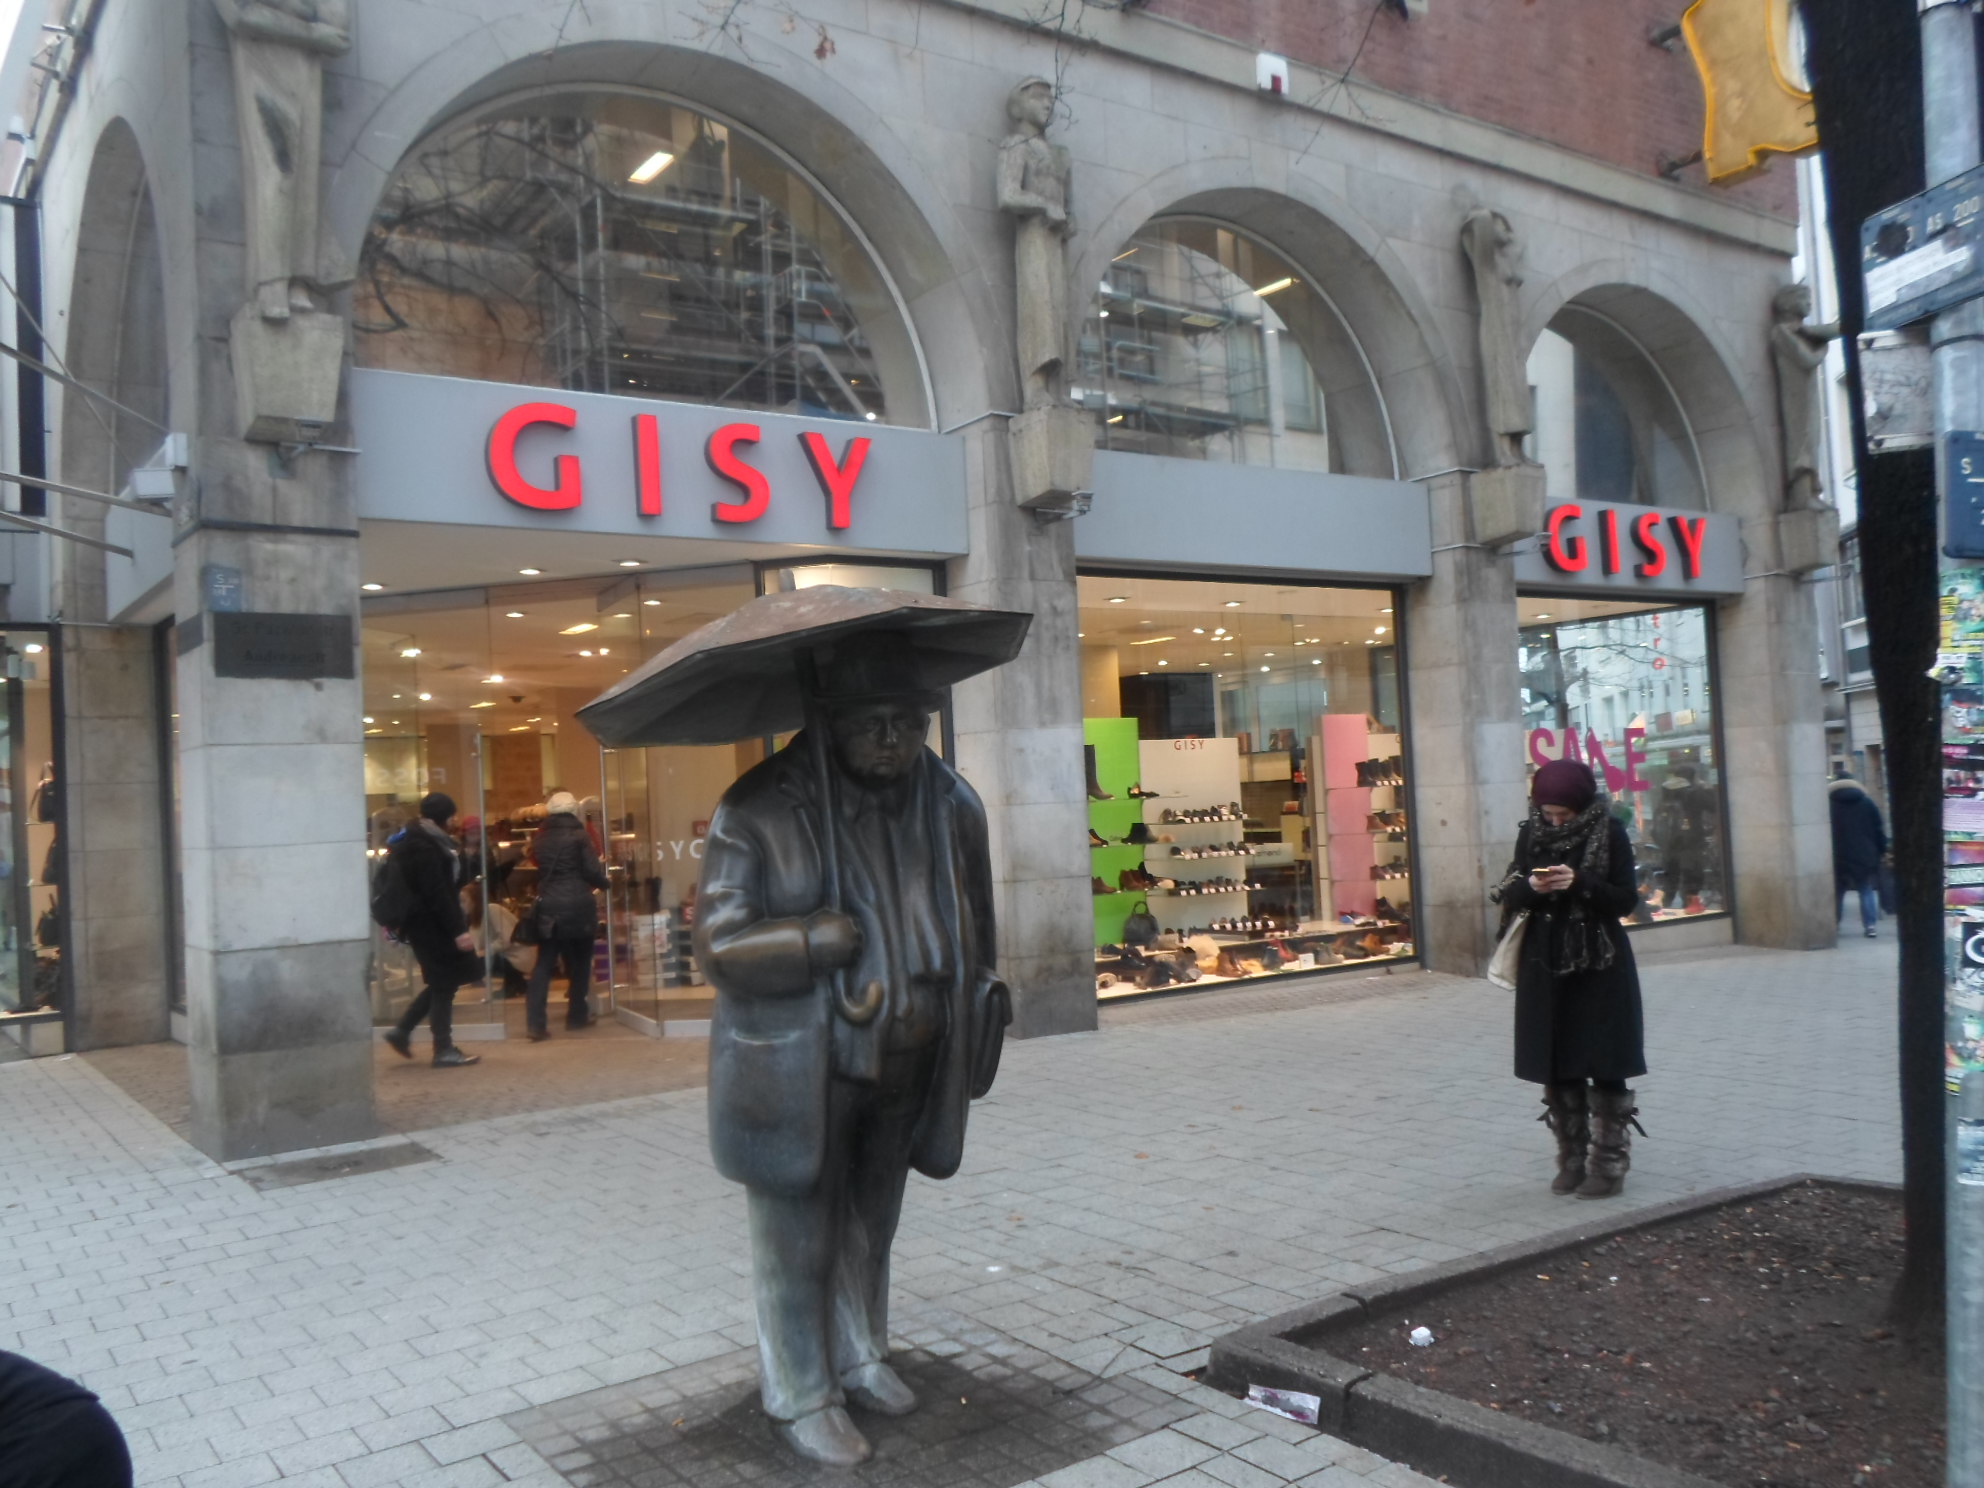 Gisy Schuhe GmbH & Co. in 30159 Hannover-Mitte